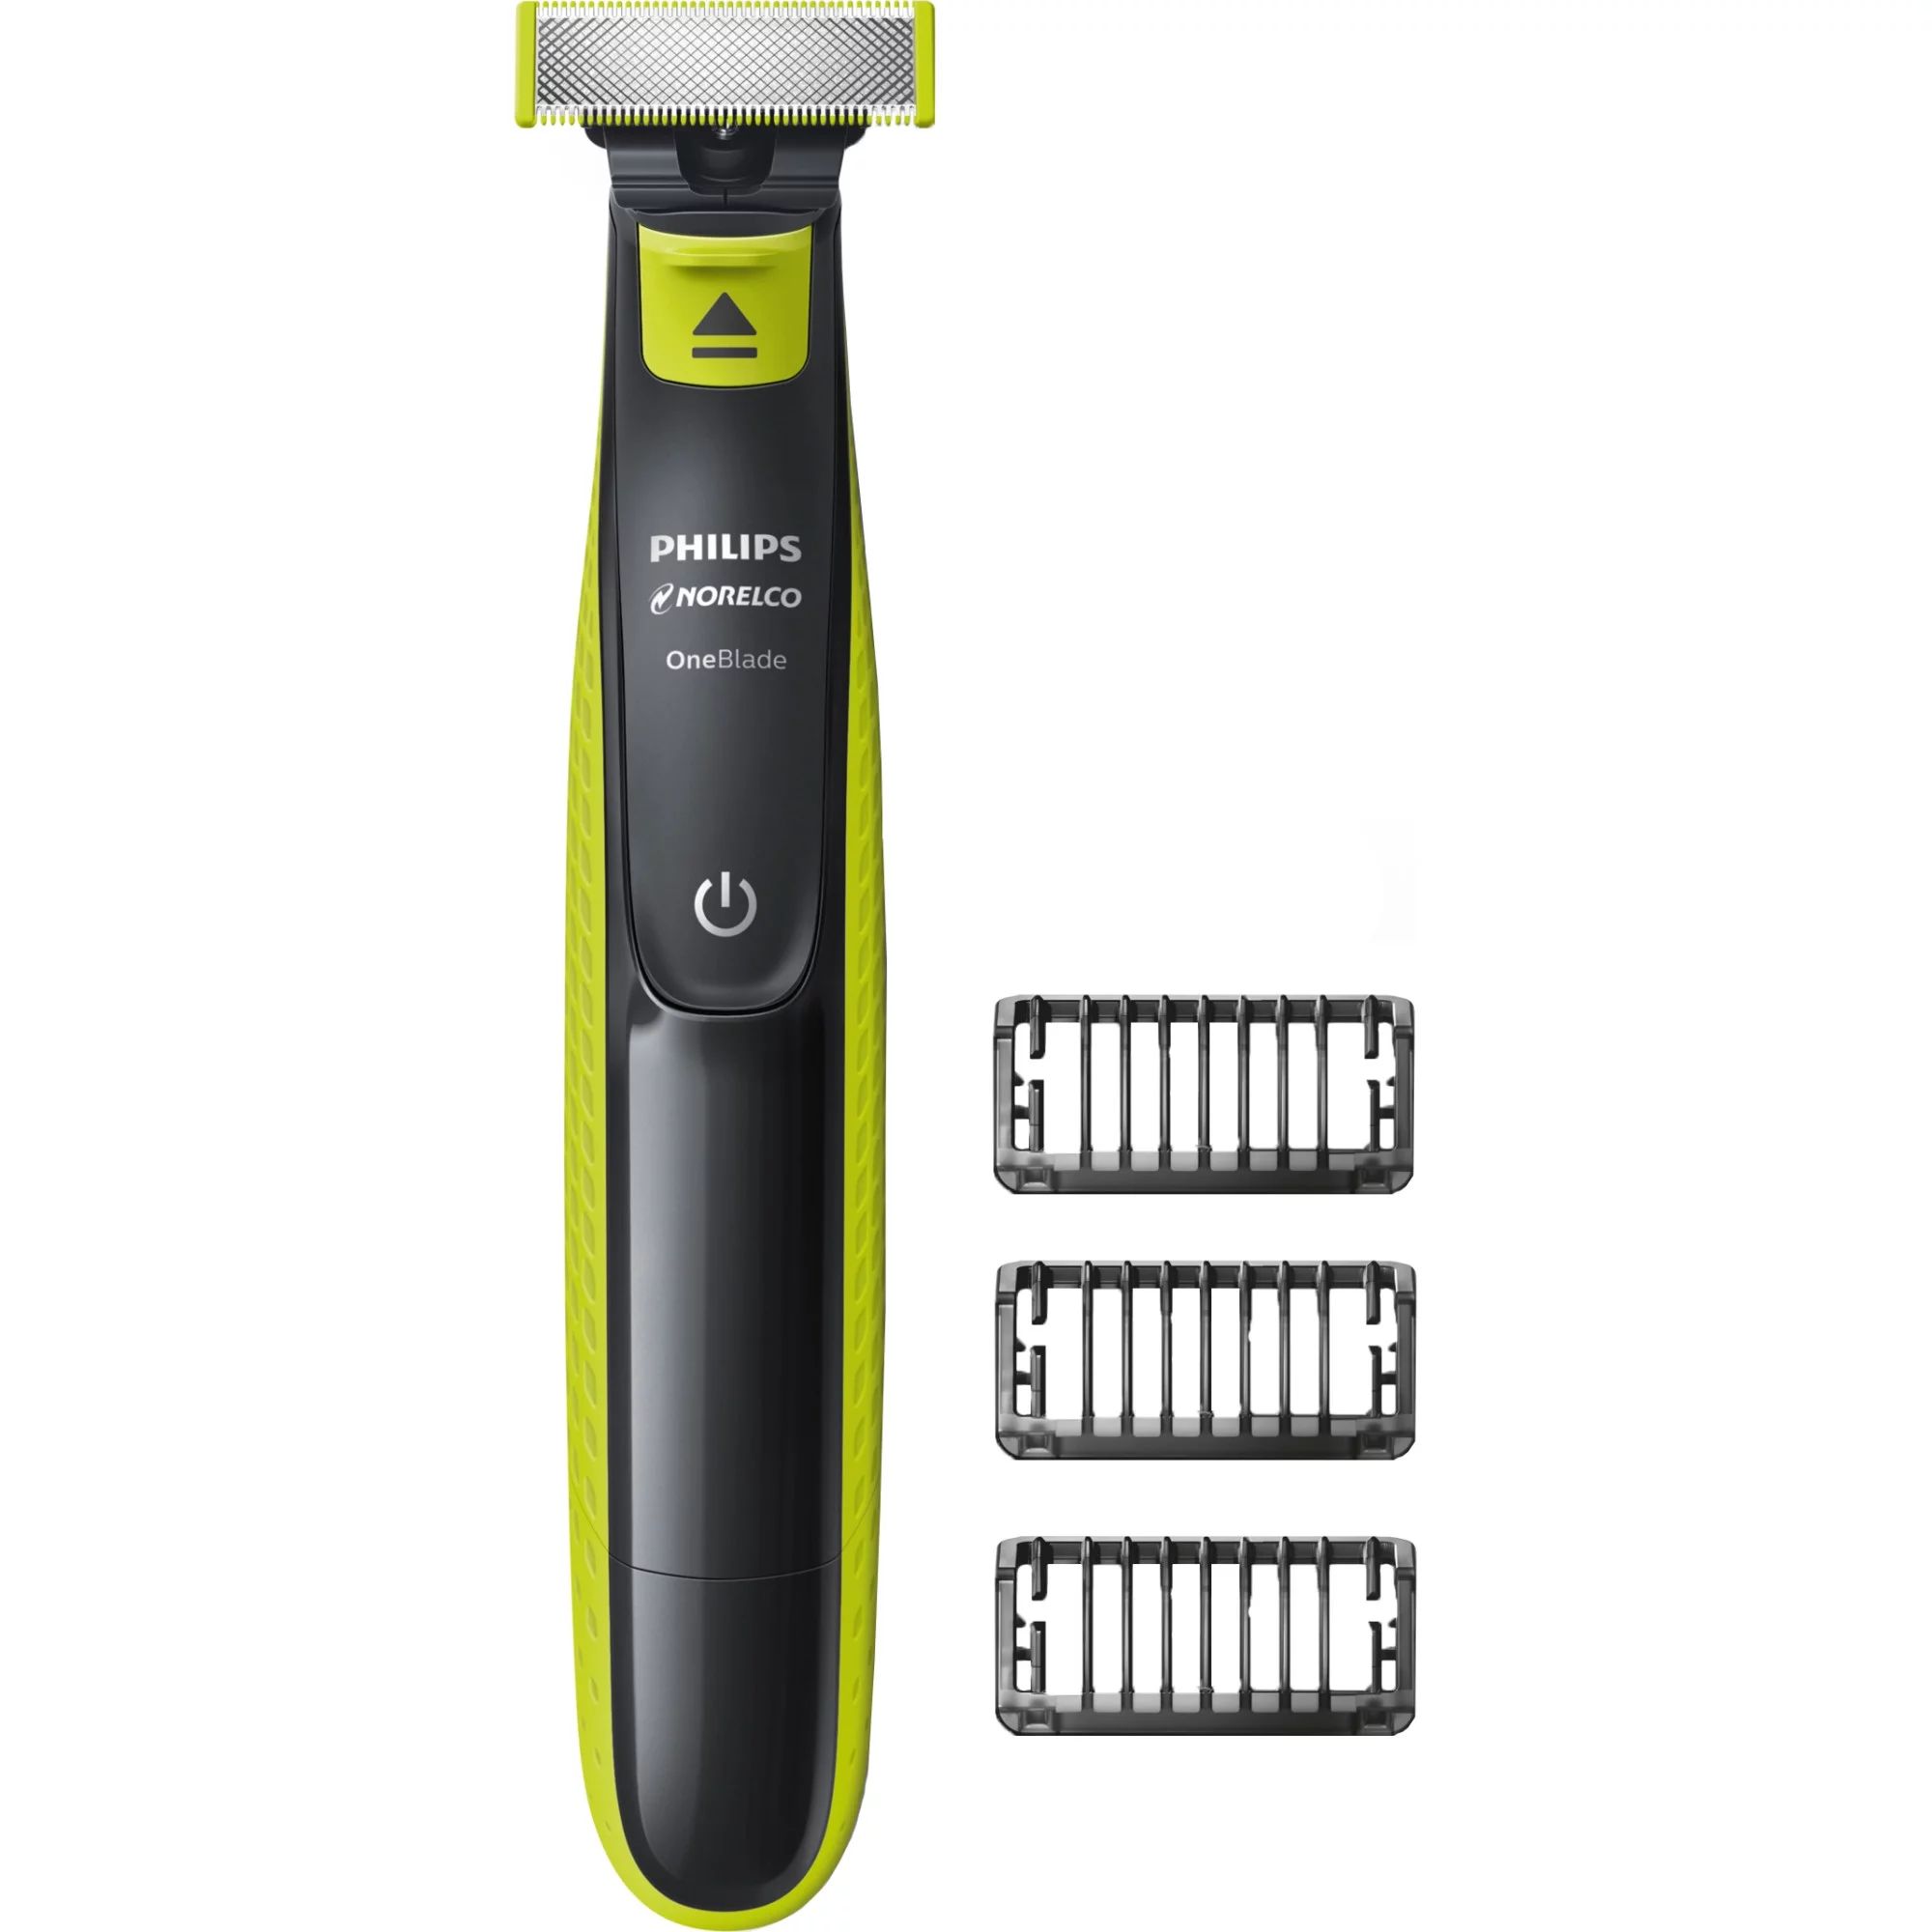 Philips Norelco OneBlade hybrid electric trimmer and shaver, QP2520/70 | Walmart (US)